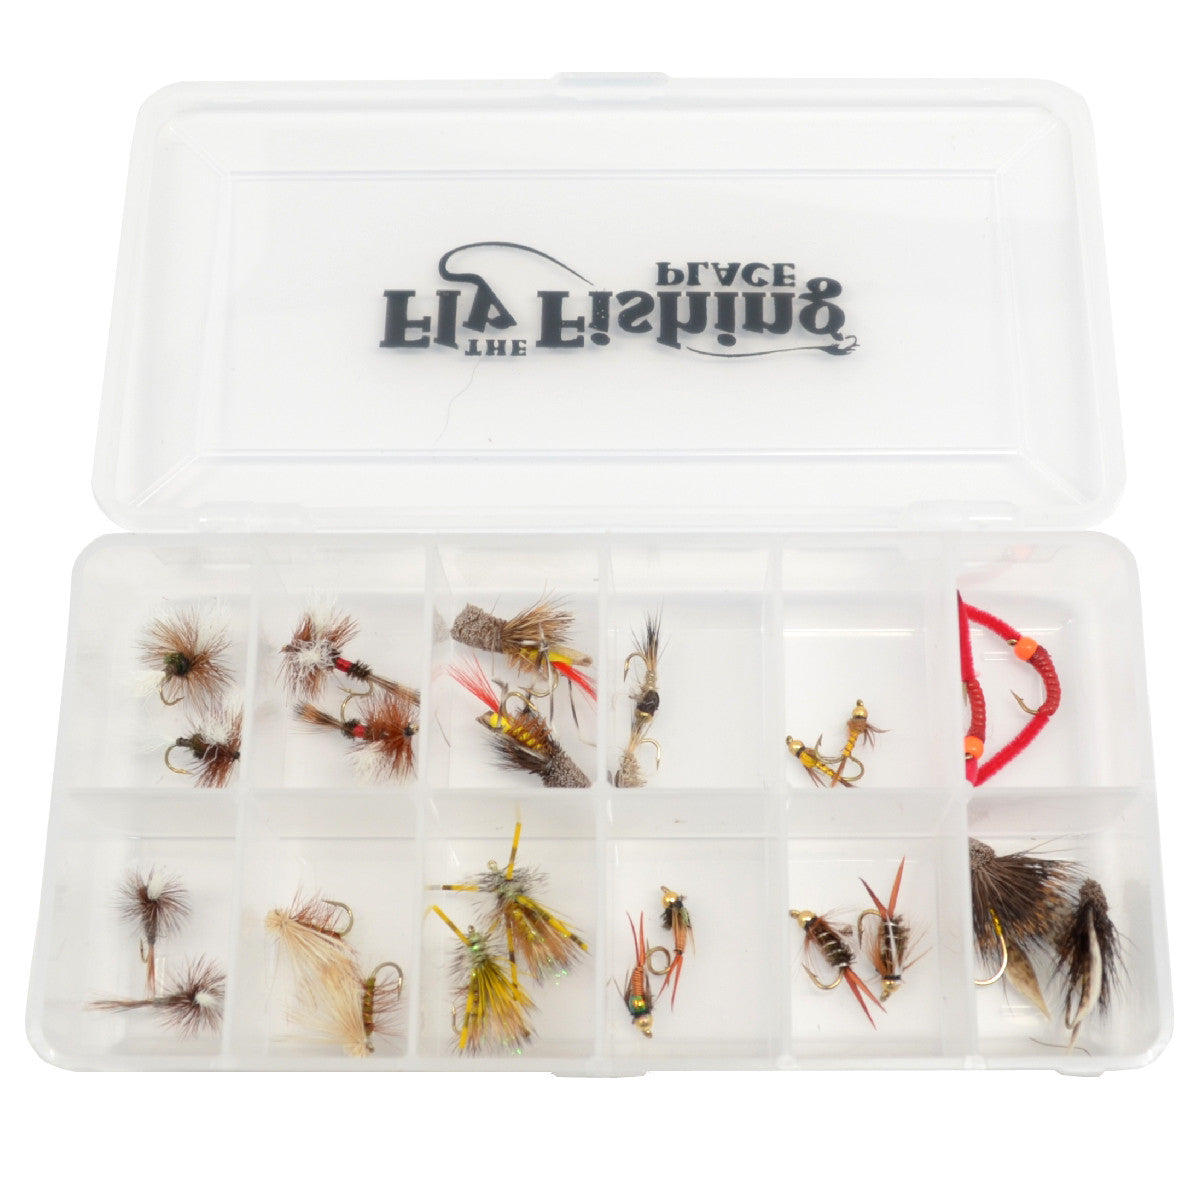 Fly Fishing Flies Kit, 50/114Pcs Handmade Fly Fishing Gear with Dry/Wet  Flies, Streamers, Fly Assortment Trout Bass Fishing with Fly Box  114pcs/Set--11 Mixed Styles